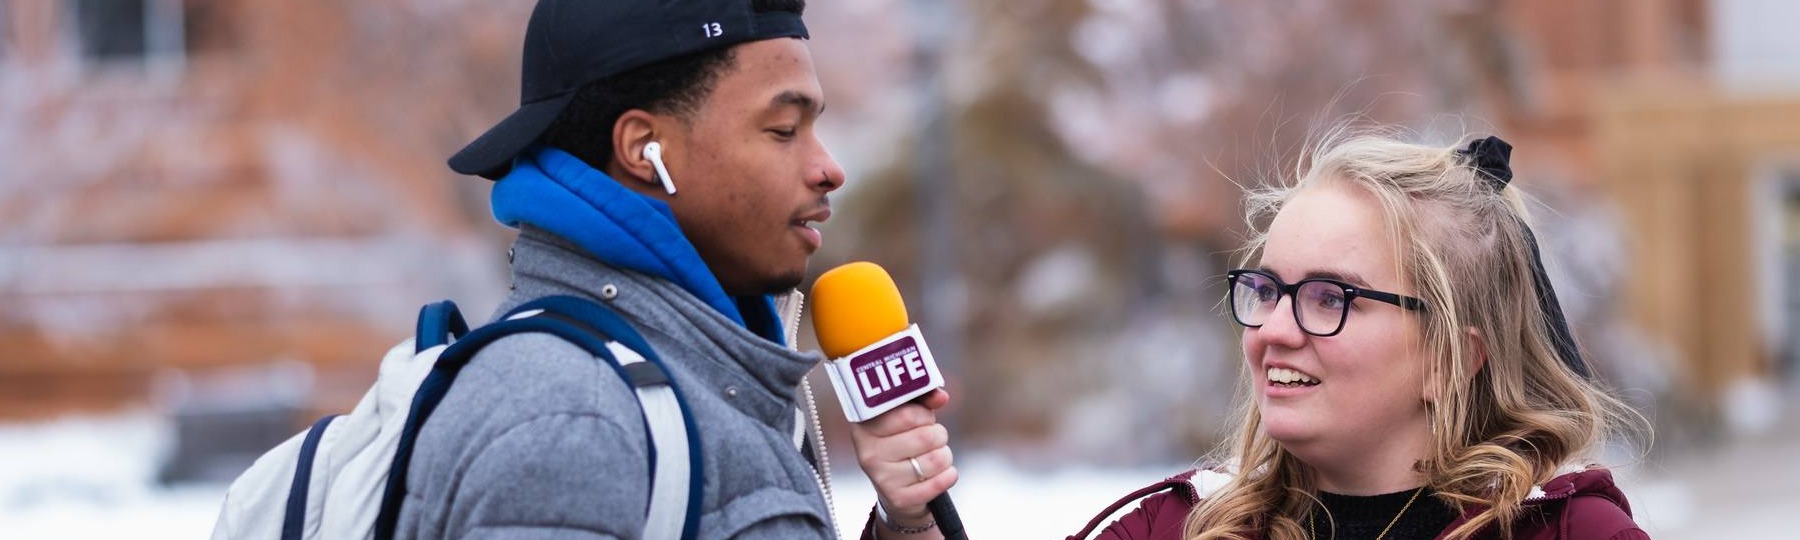 CM-Life's Alanna Sparks interviews a student on campus during the winter.